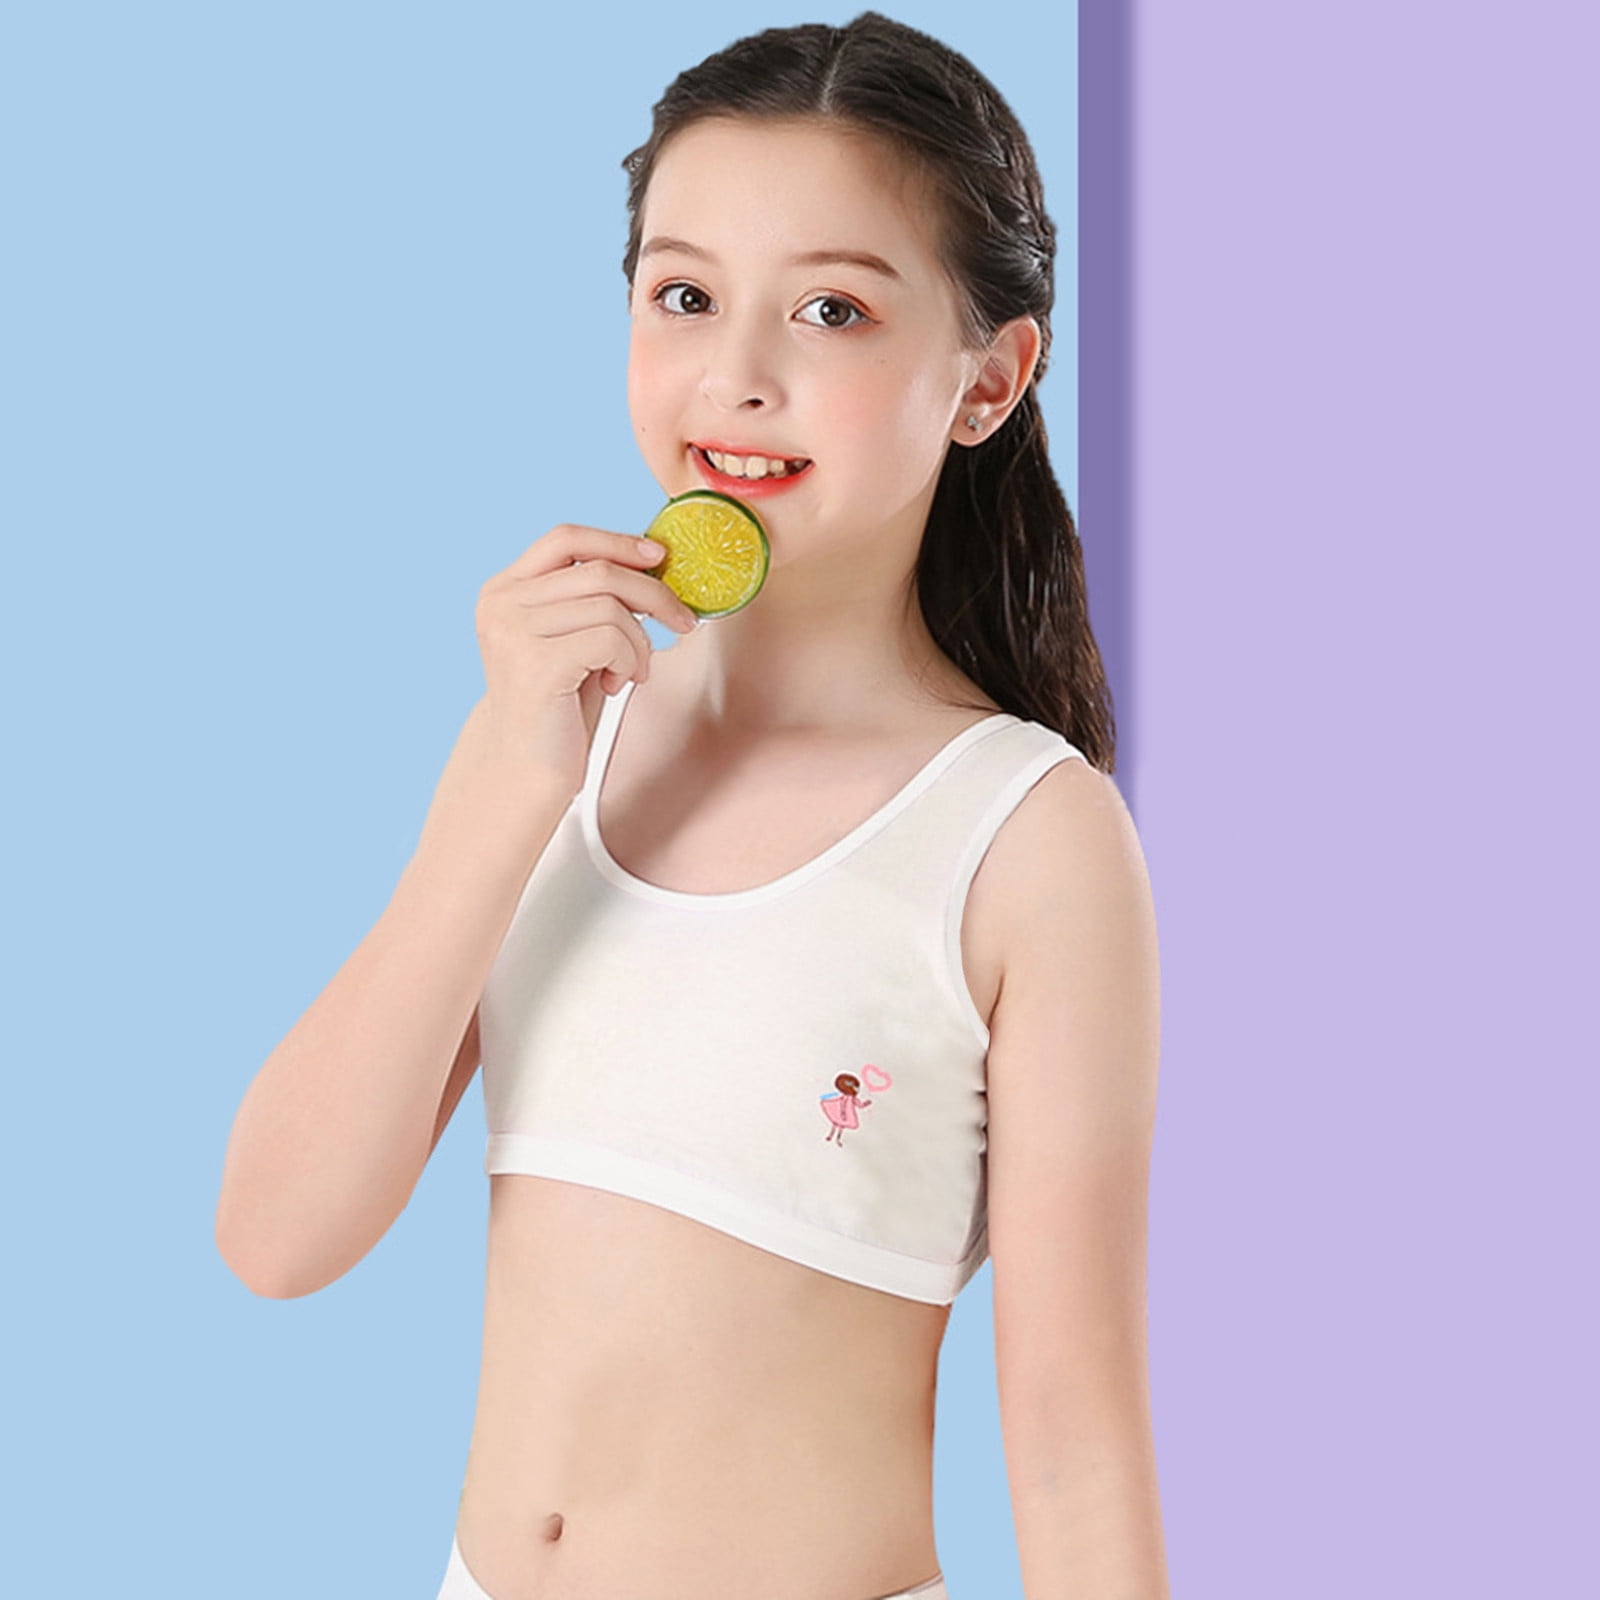 Training bras for girls age is 9-13 yrs old. 